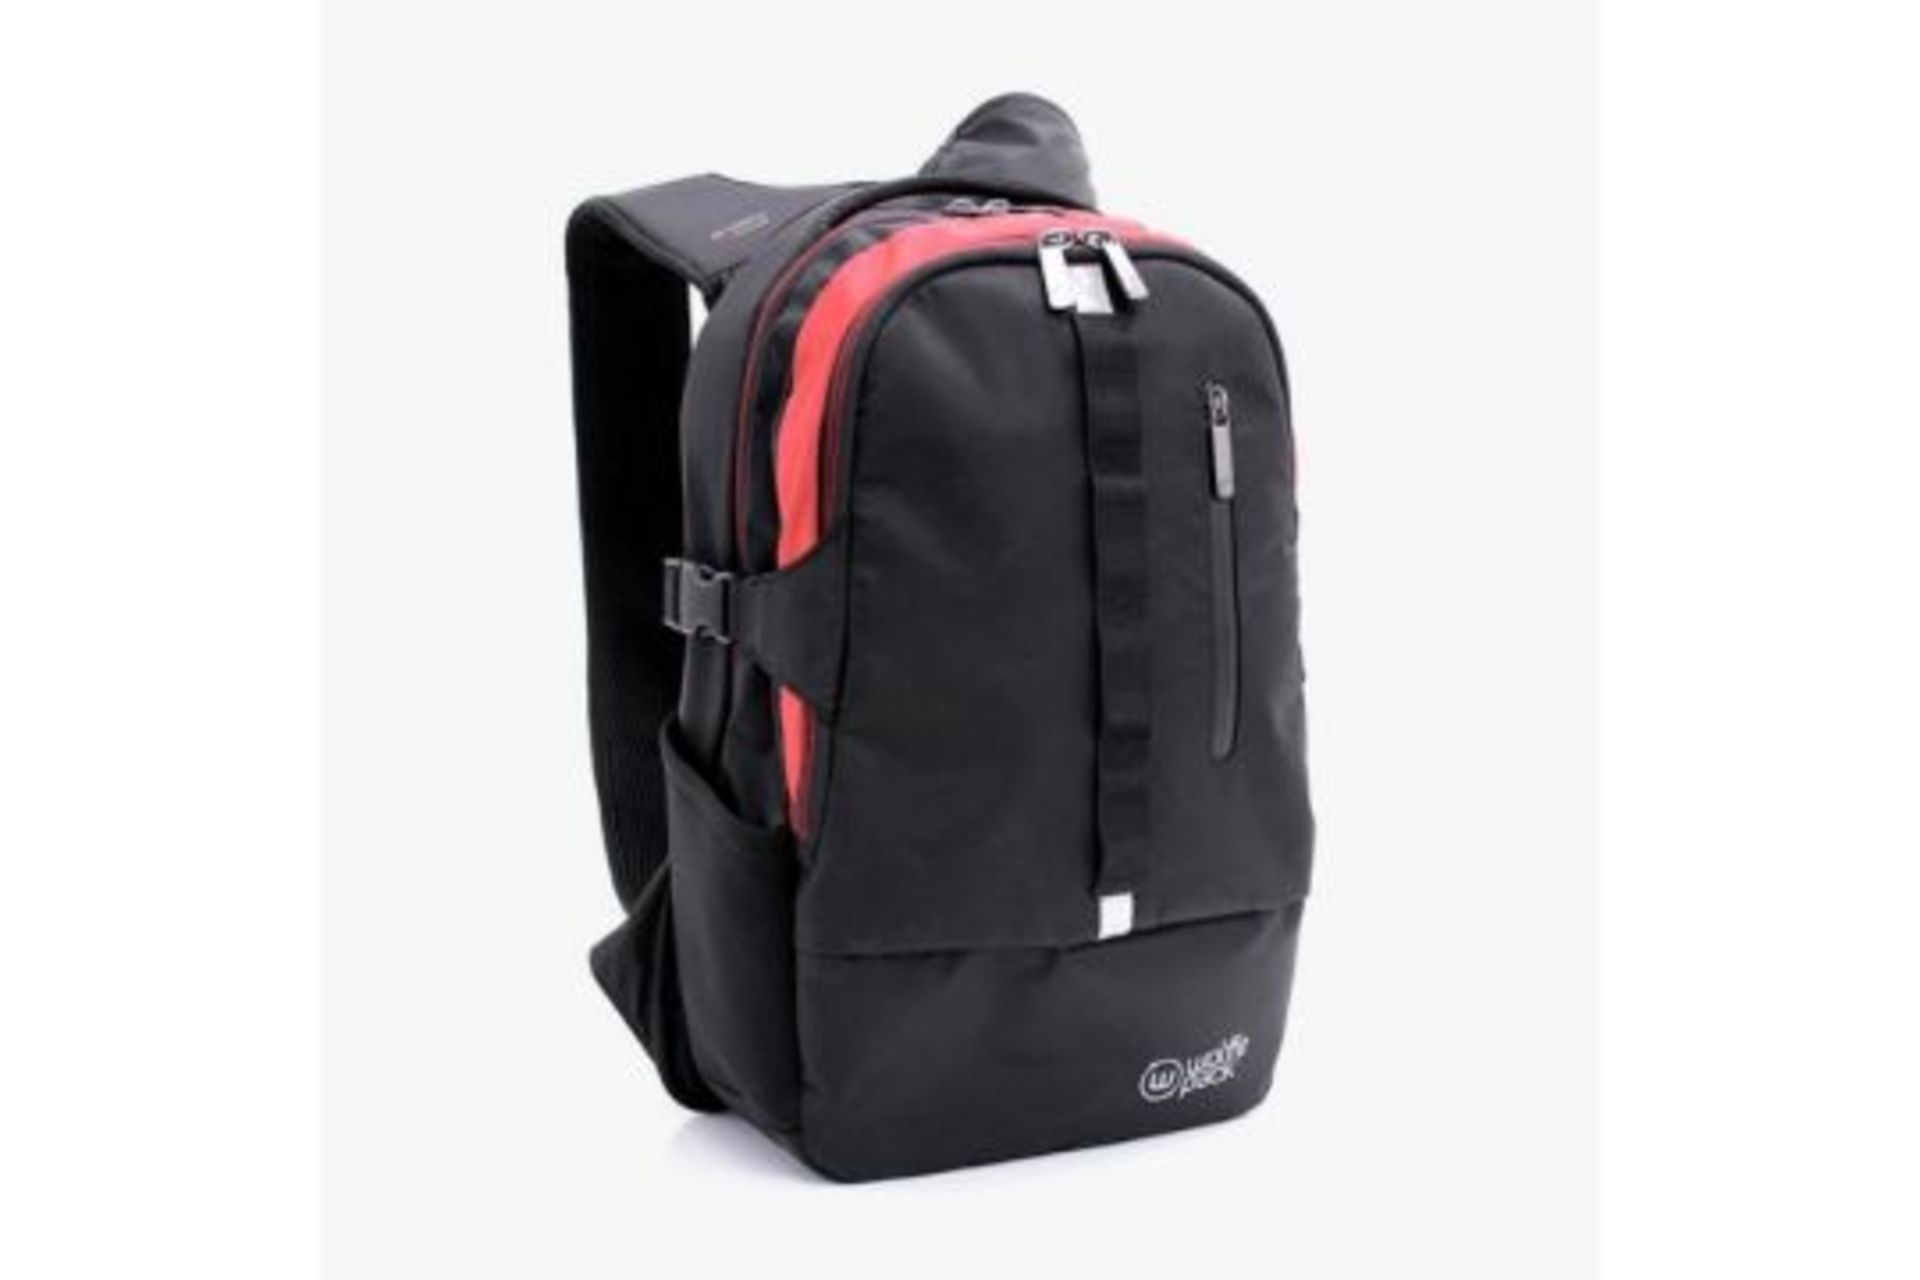 2 X BRAND NEW WOLFFEPACK ESCAPE BACKPACKS FOR EVERYDAY ACTION, 18L CAPACITY FOR TRAVEL, HIKING,